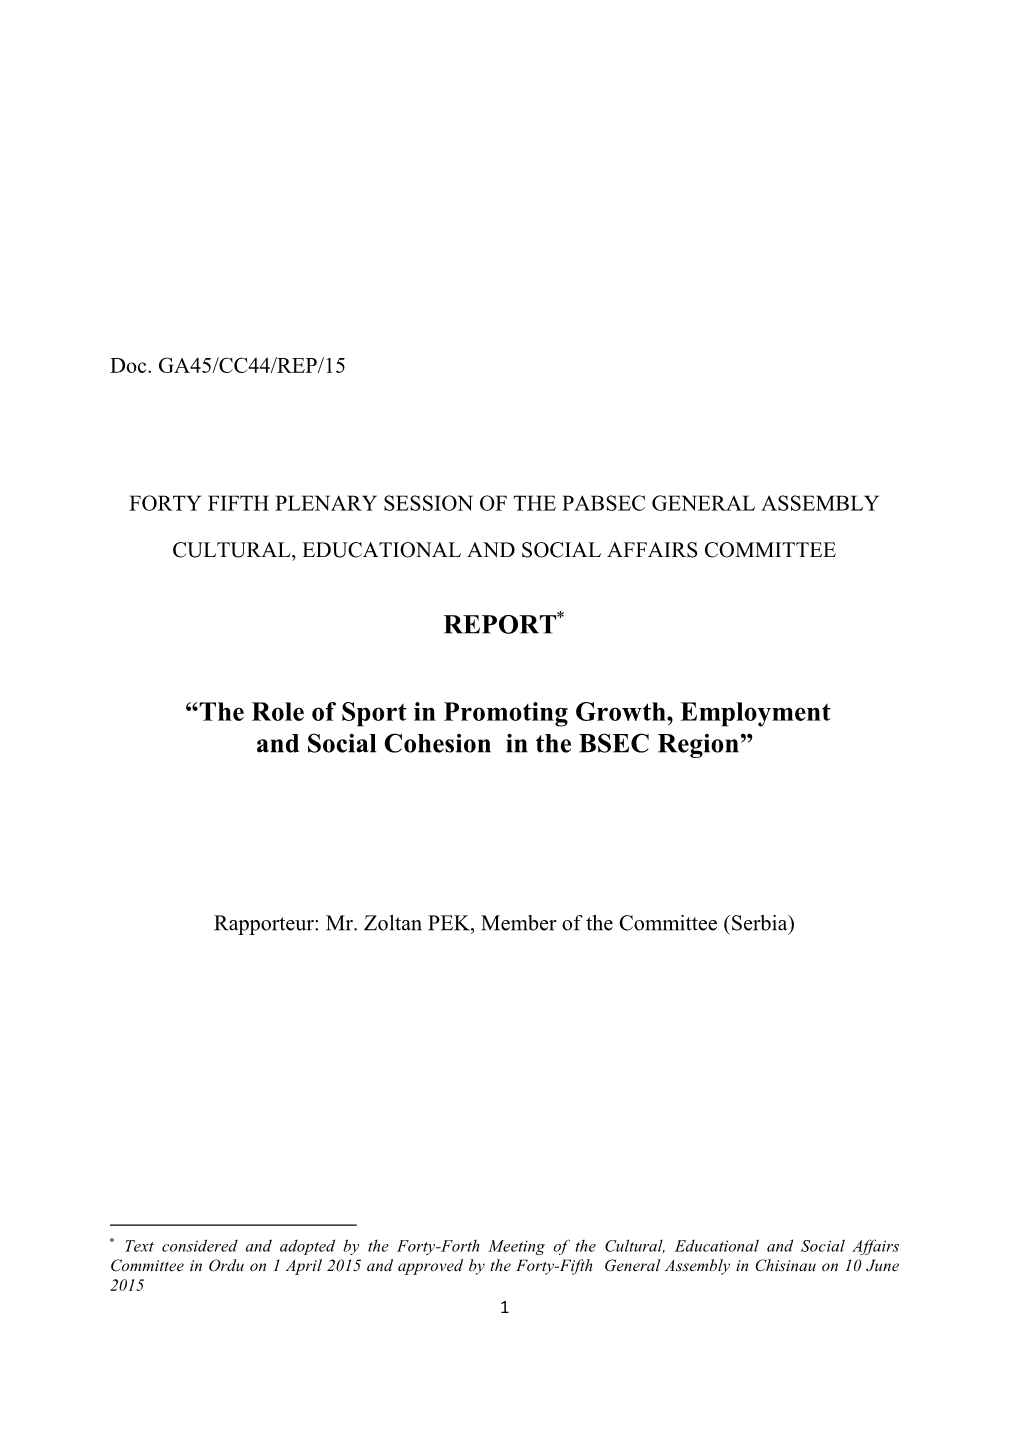 REPORT “The Role of Sport in Promoting Growth